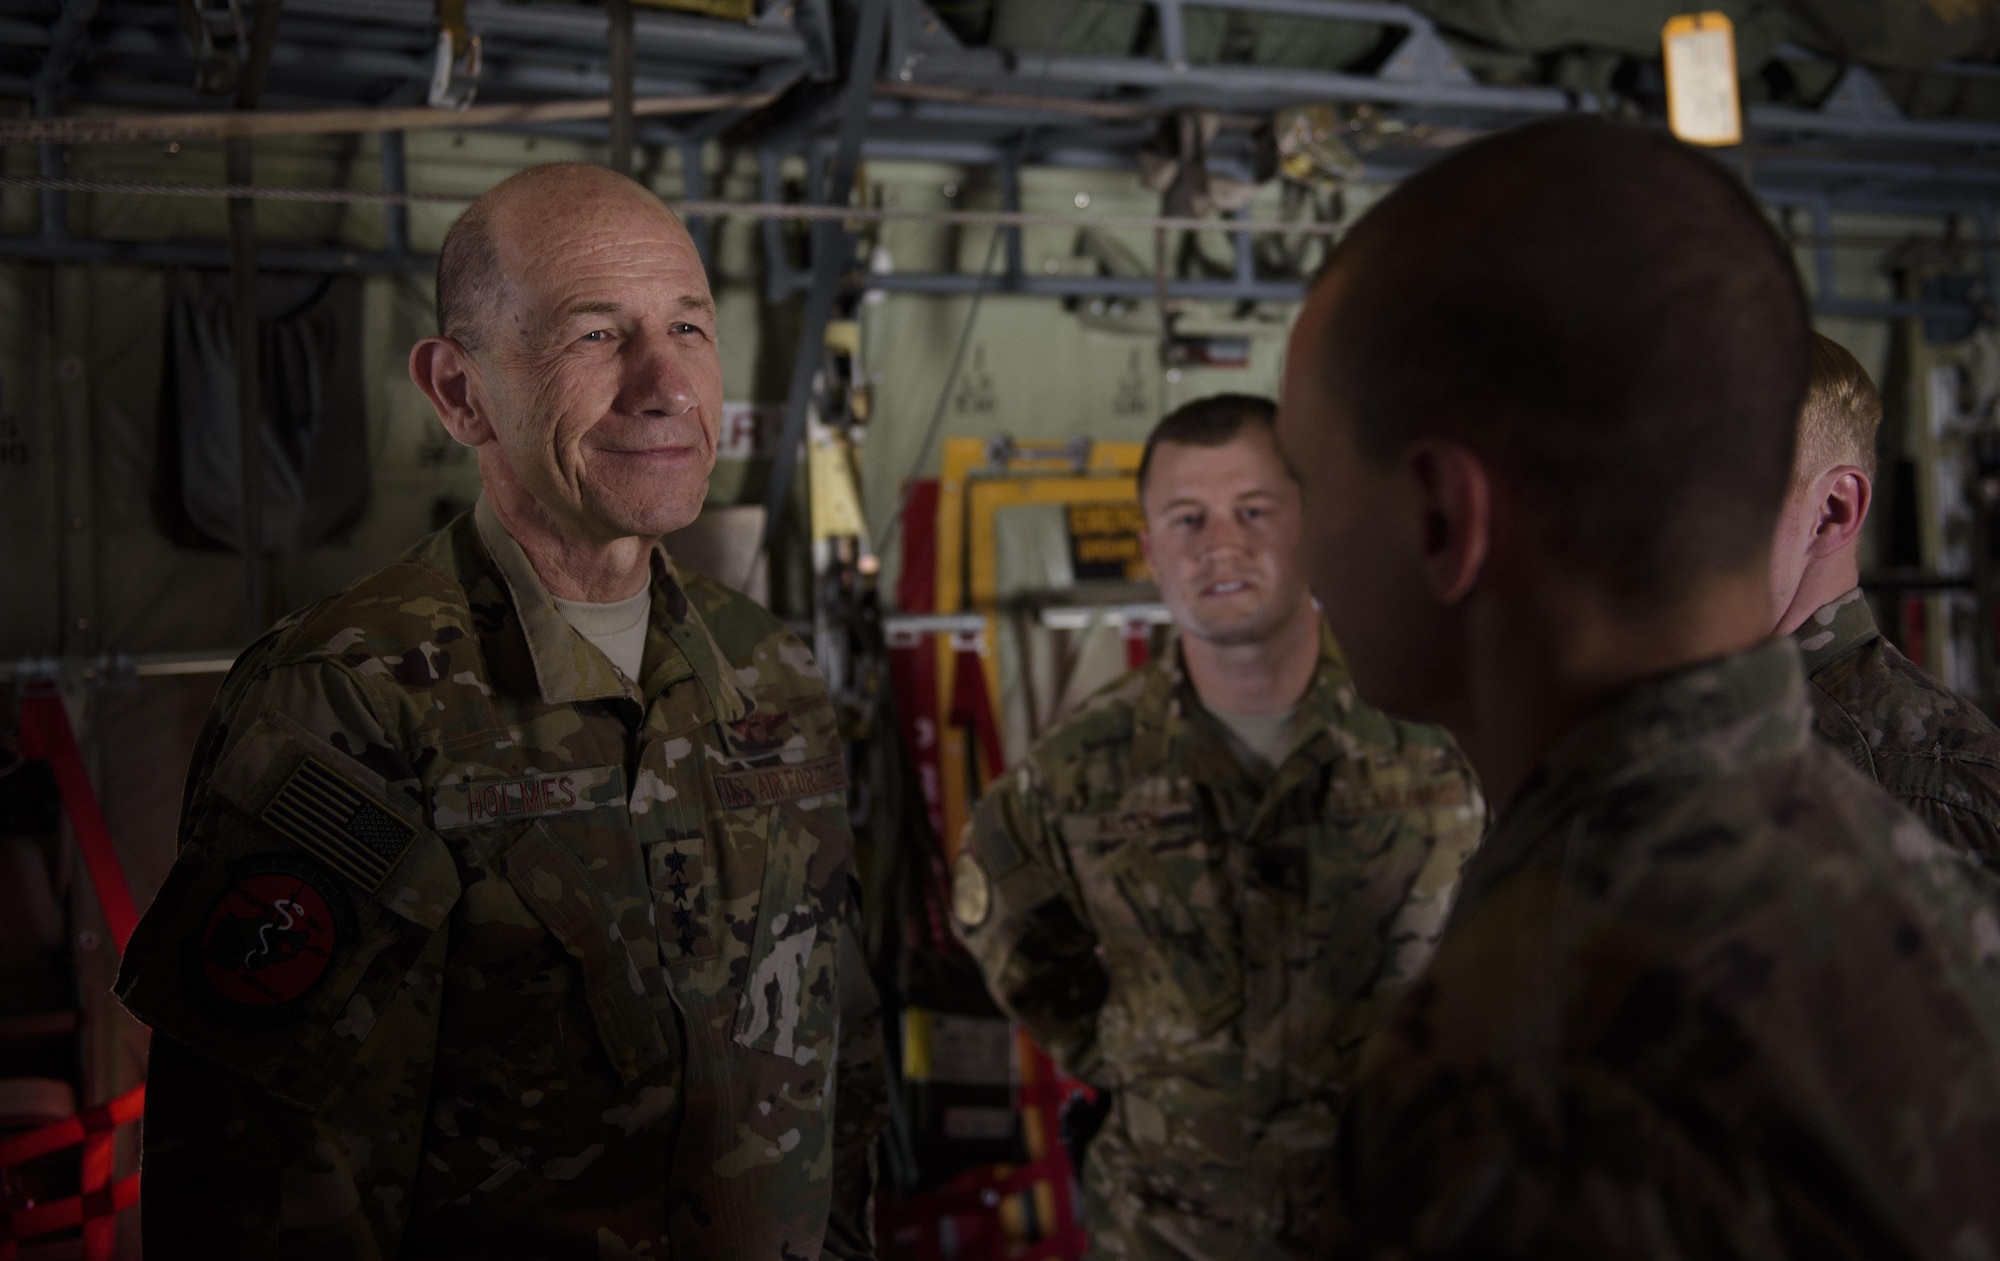 Gen. Mike Holmes, commander of Air Combat Command, speaks with an Airman 1st Class Edward Wobensmith, 455th Expeditionary Aircraft Maintenance Squadron, at Bagram Airfield, Afghanistan, May 25, 2017. Holmes visited Bagram Airfield to speak with Airmen and Soldiers, and to see firsthand the multiple ways Airmen project airpower in the region. (U.S. Air Force photo by Staff Sgt. Benjamin Gonsier)